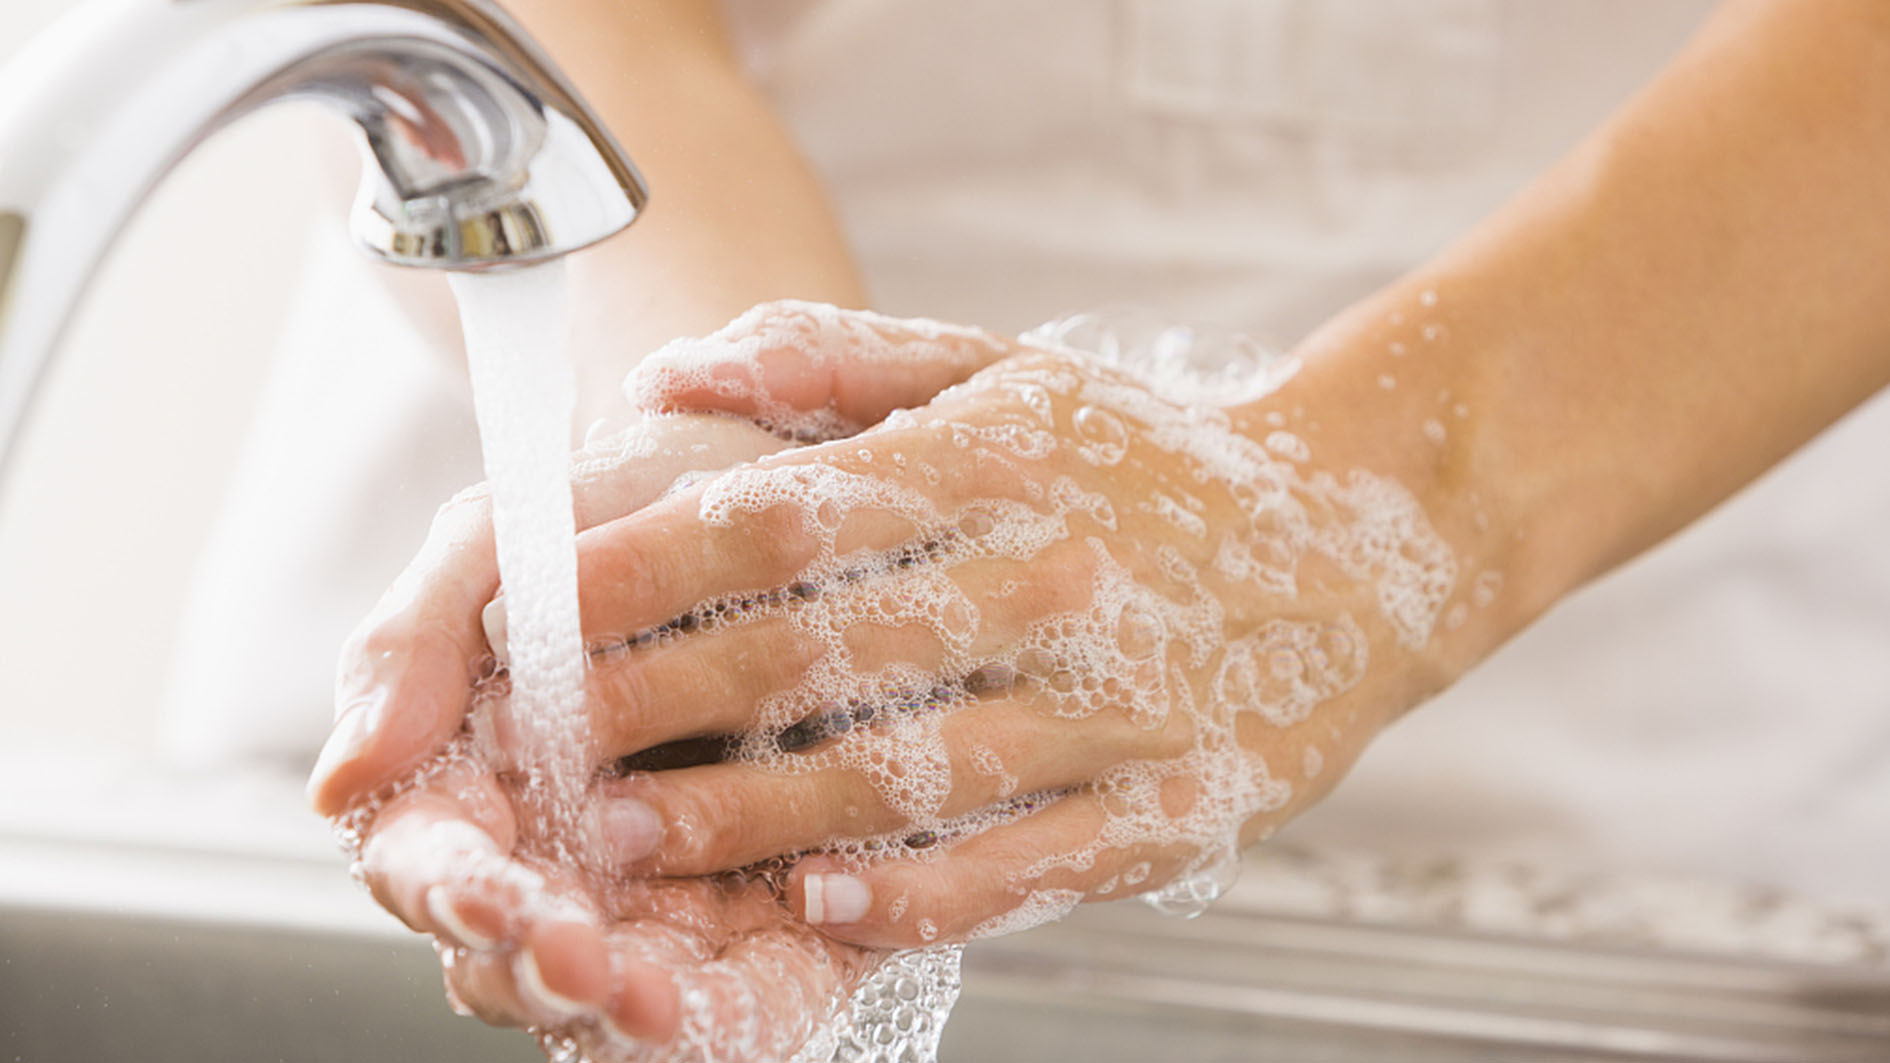 COVID-19: Frequent hand washing gives rise to skin 